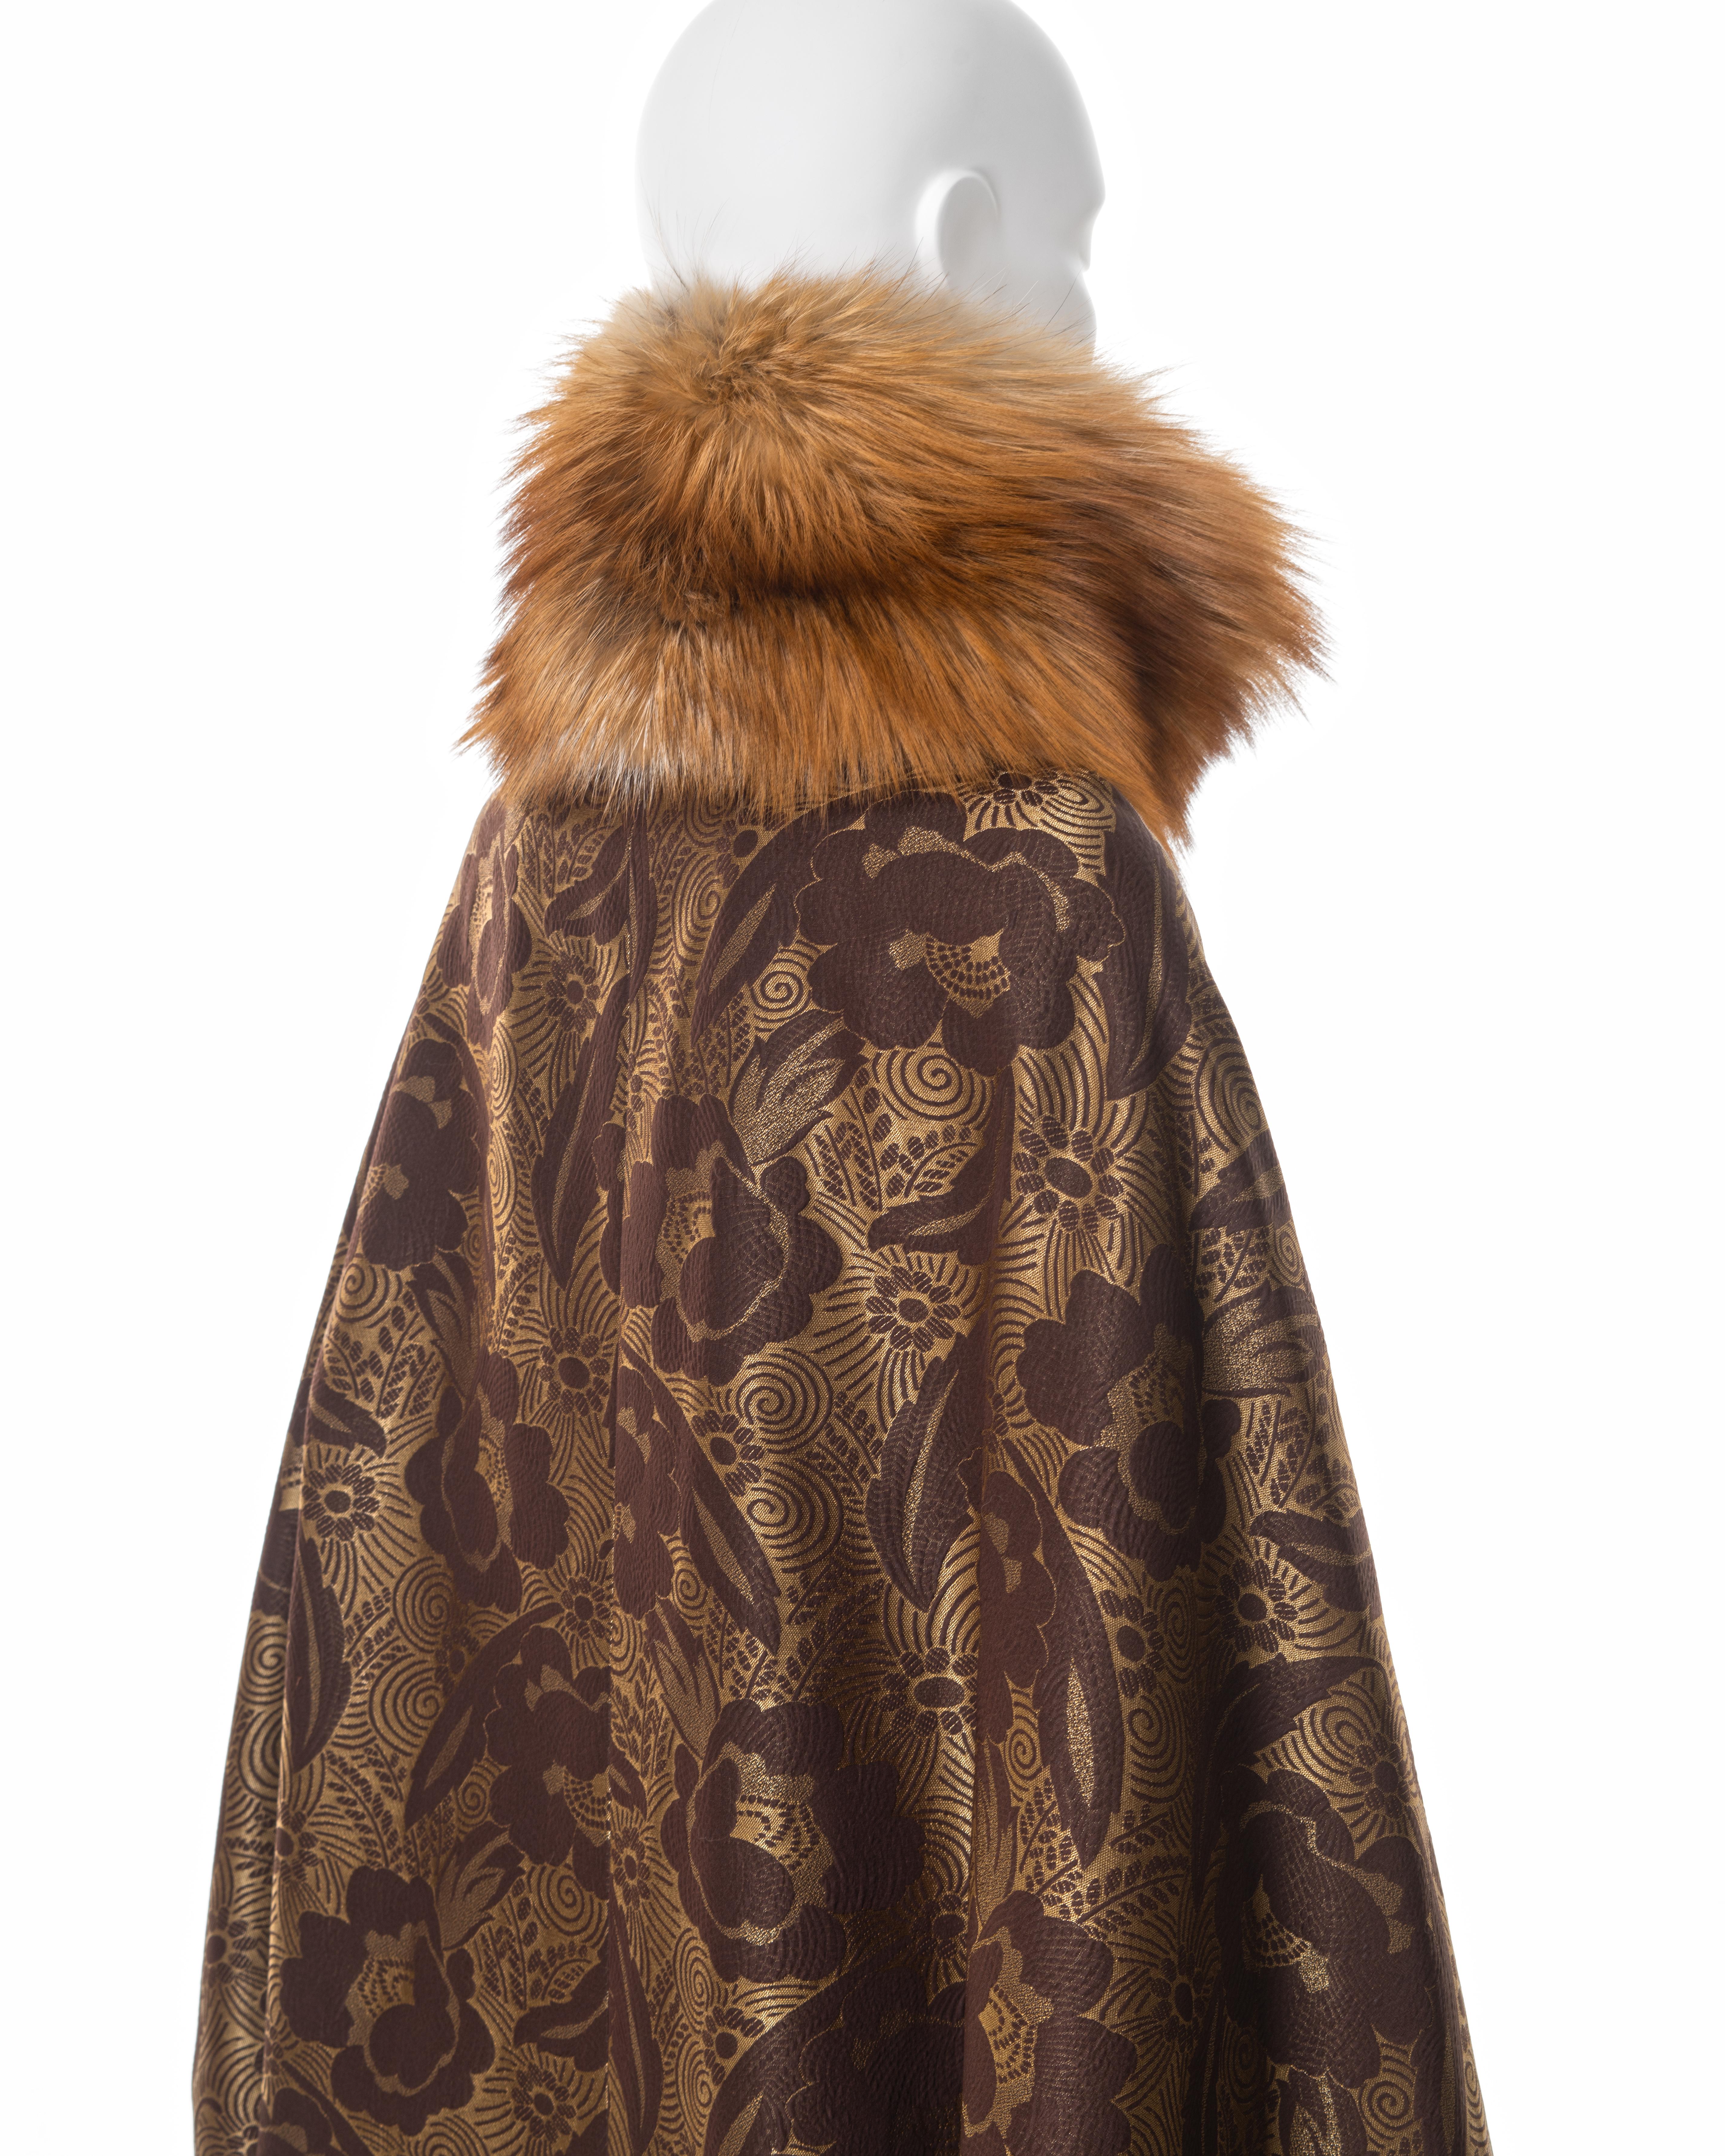 Christian Dior by John Galliano silk cocoon coat with fox fur collar, ss 2008 For Sale 3